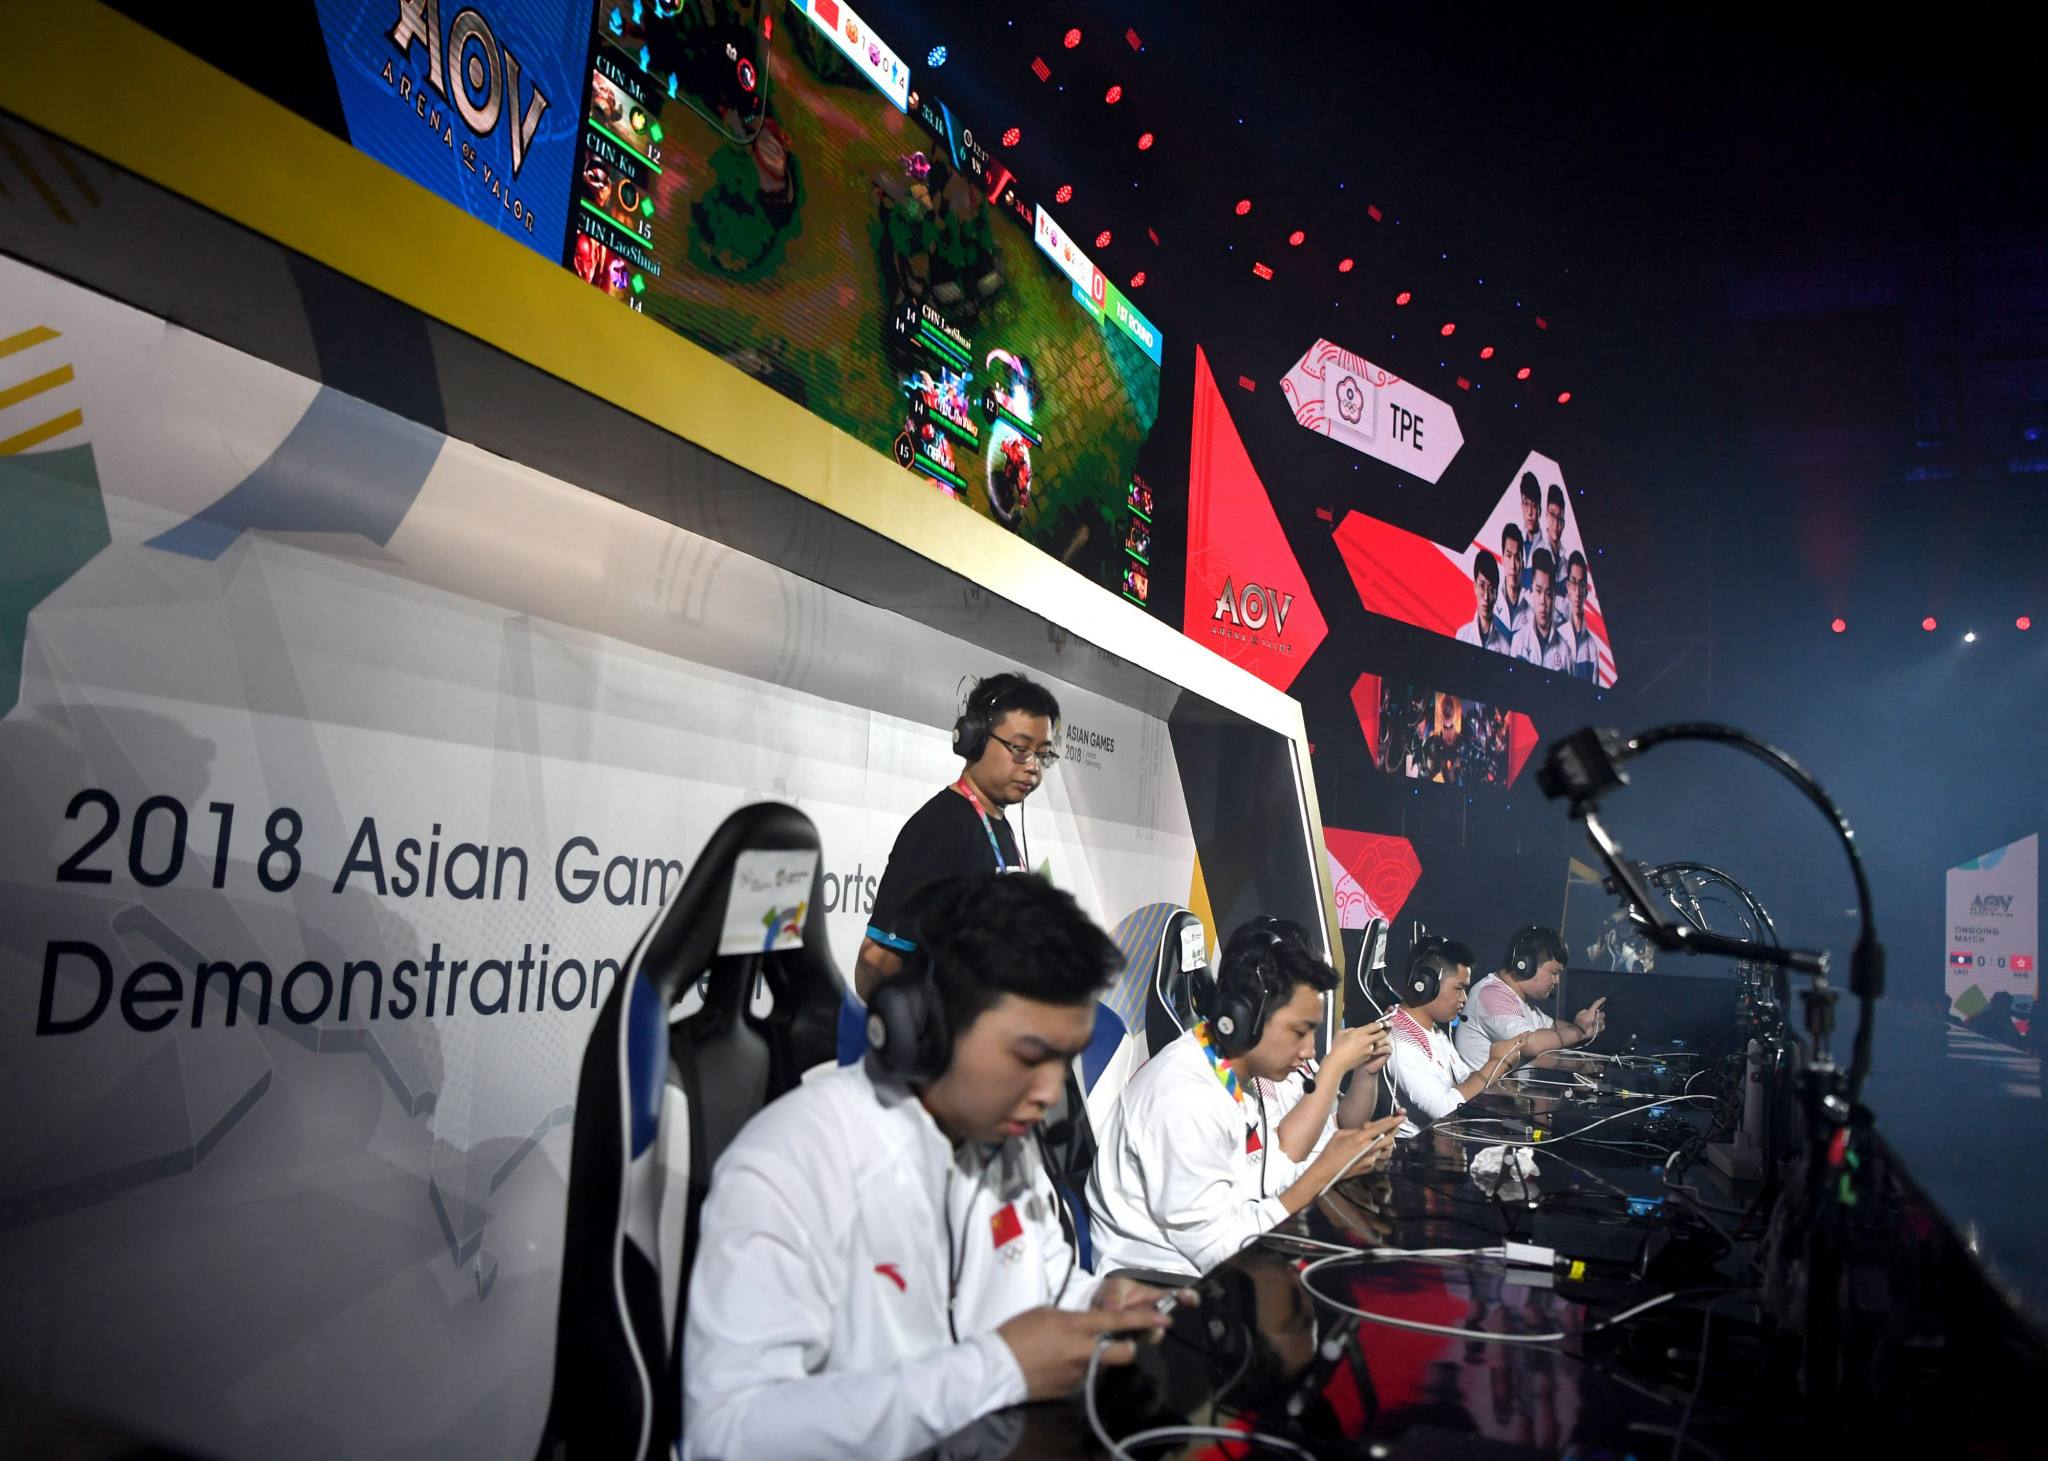 Esports was a demonstration sport at the 2018 Asian Games ©Getty Images